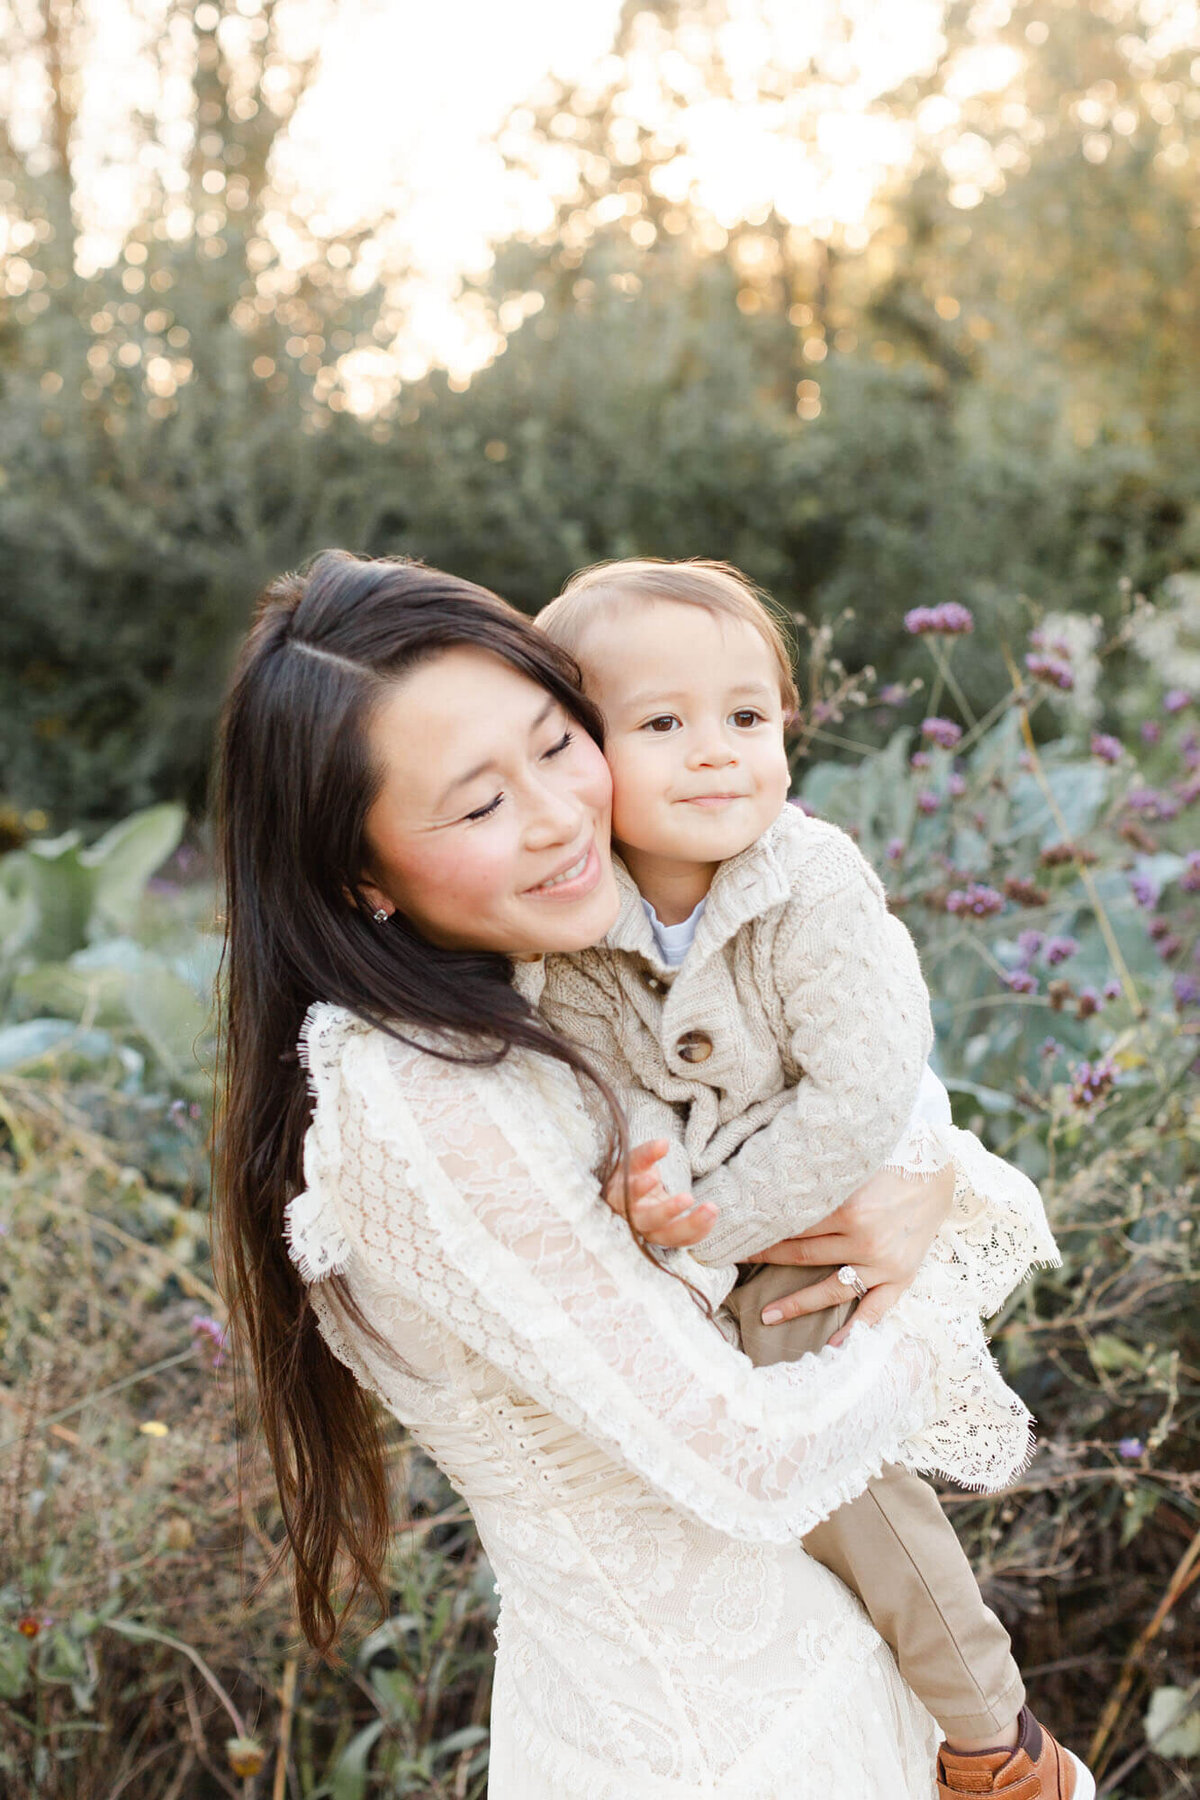 Gorgeous Mom with long dark hair cascading down her back and wearing a gorgeous Zimmerman dress holding her toddler son in khaki and cream. They are cheek to cheek with a treeline behind them as the sun is setting and creating a beautiful golden glow.